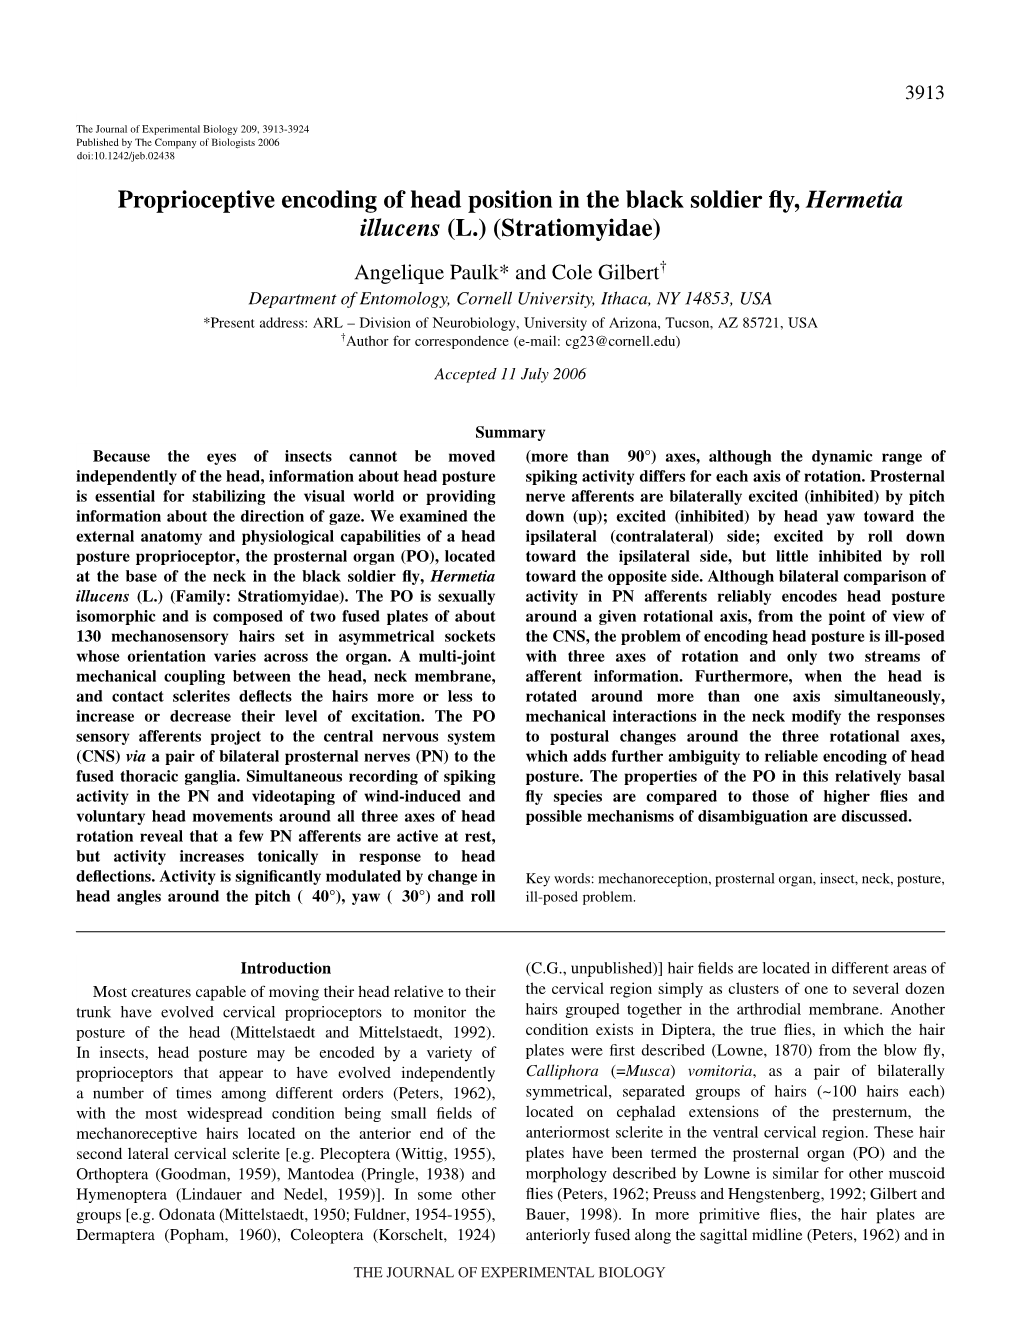 Proprioceptive Encoding of Head Position in the Black Soldier Fly